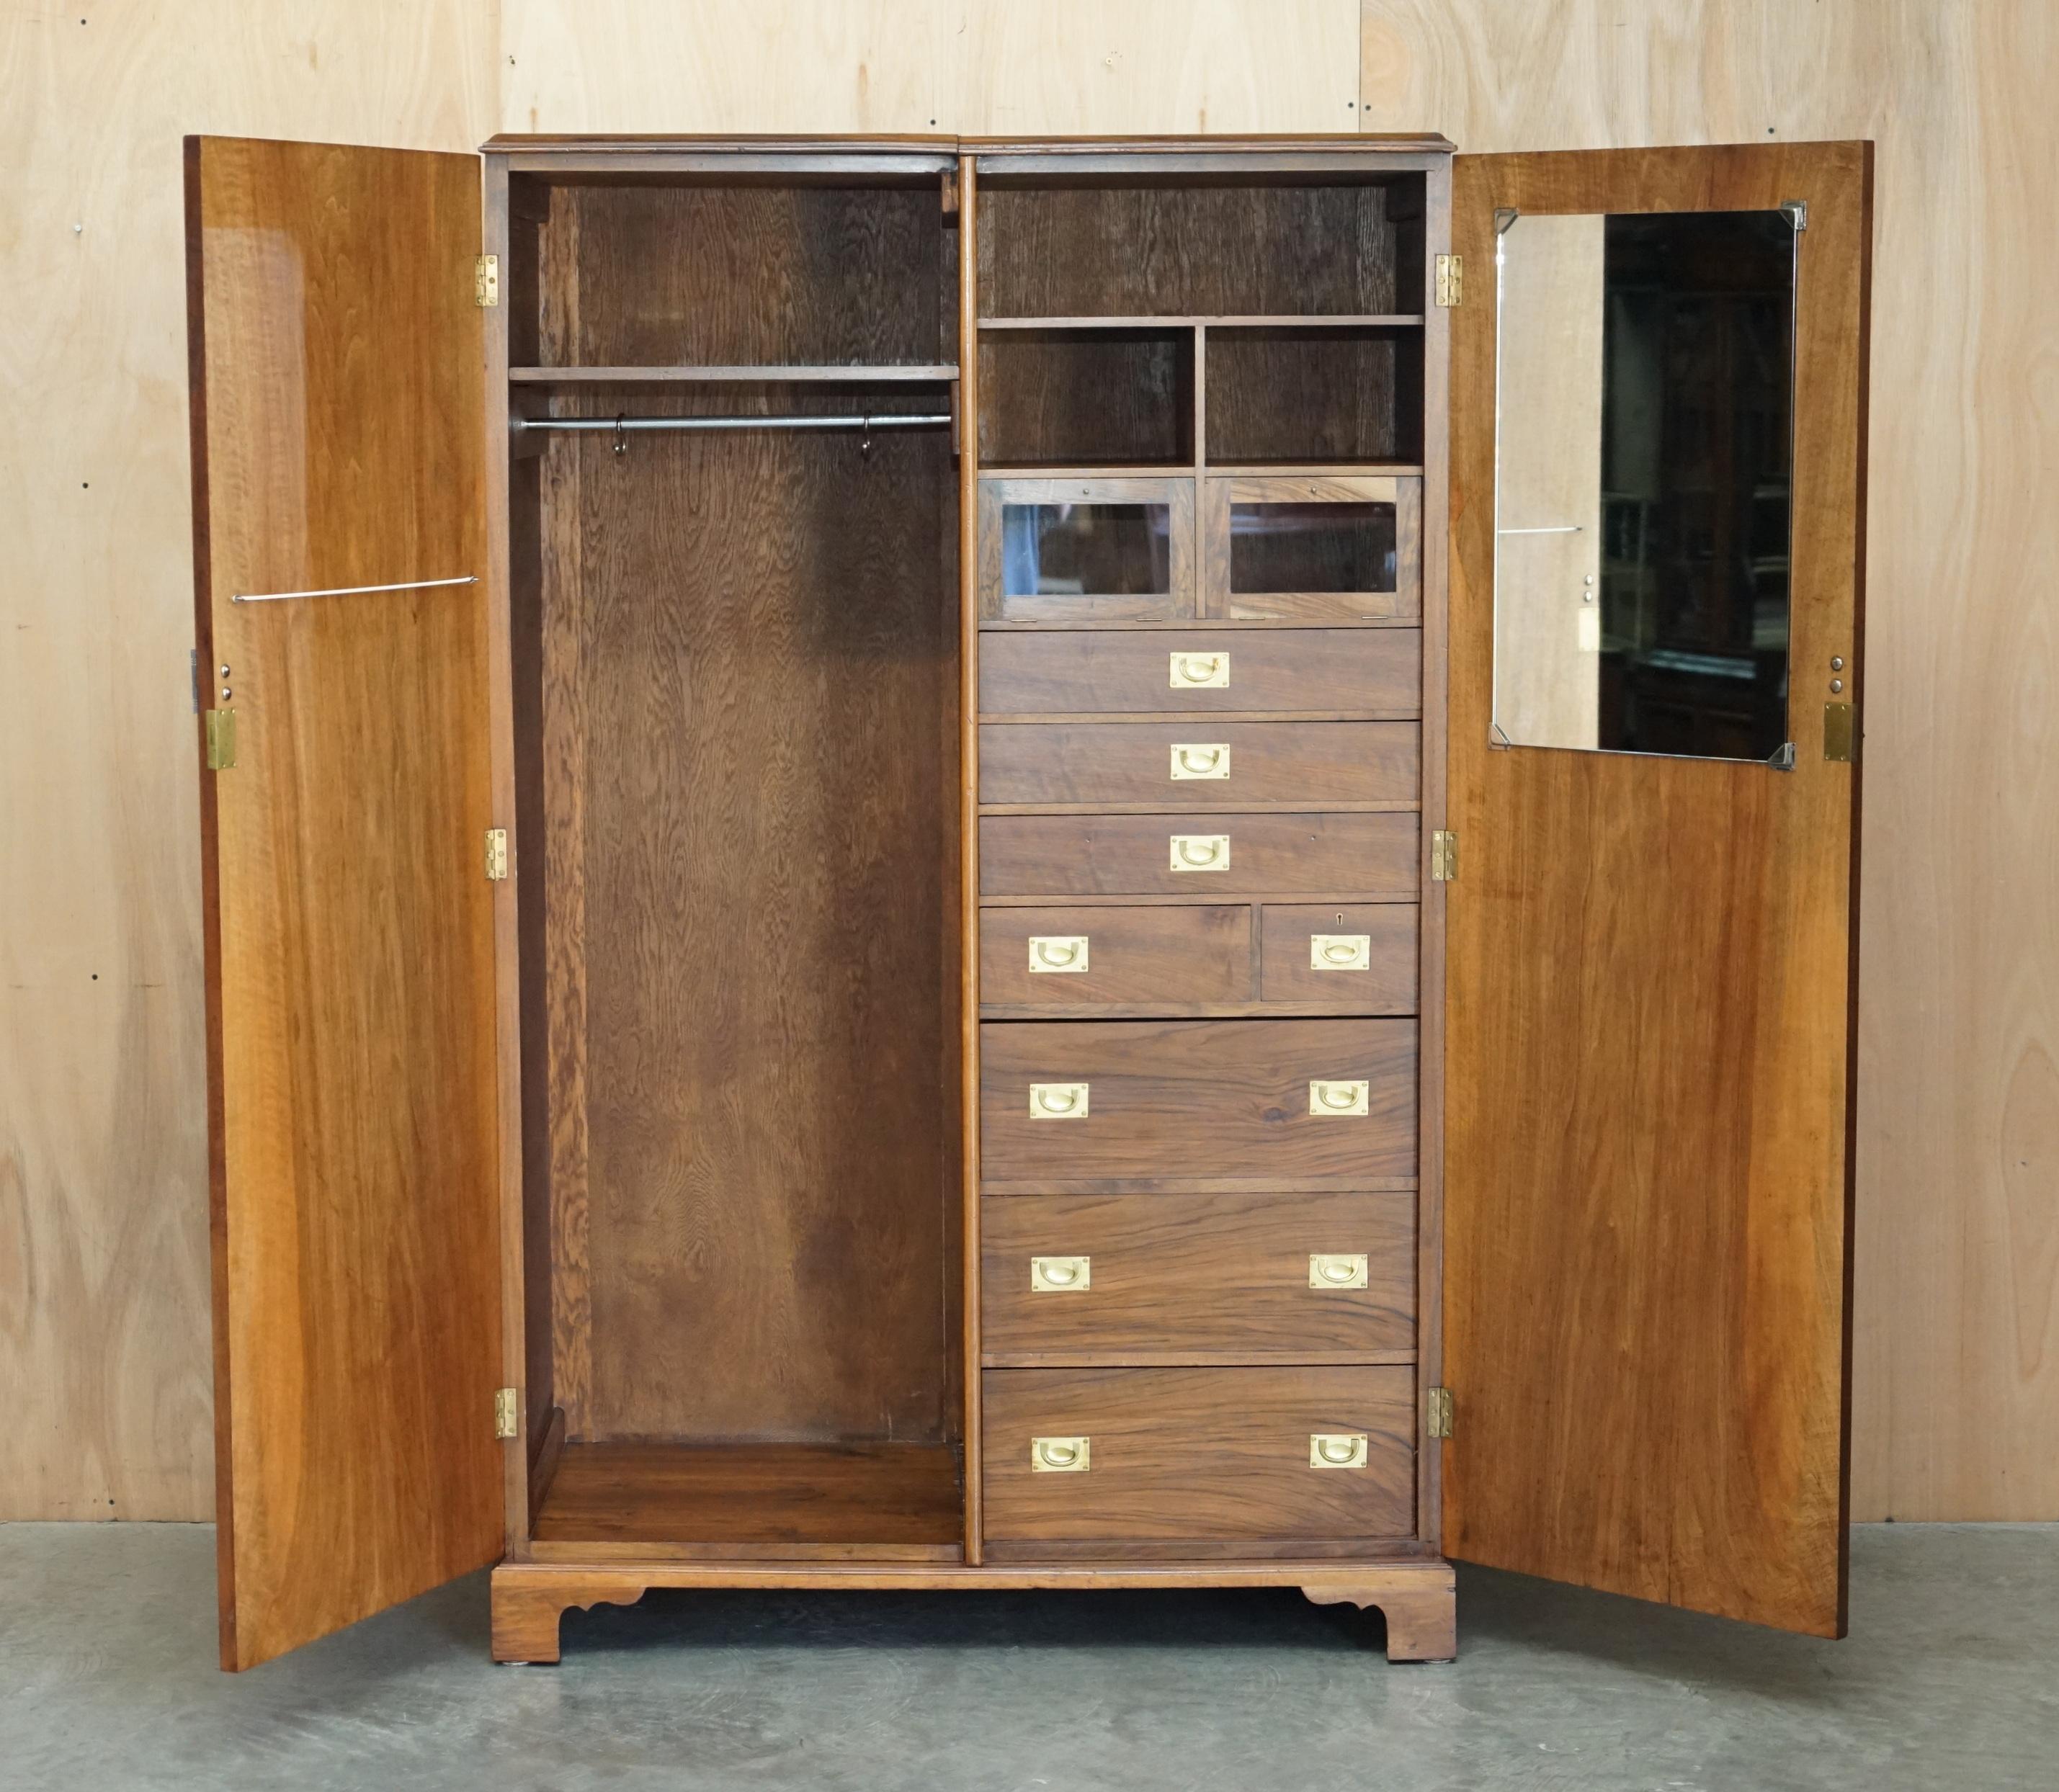 ANTIQUE BURR WALNUT WARDROBE WiTH MILITARY CAMPAIGN CHEST OF DRAWERS BUILT IN For Sale 6